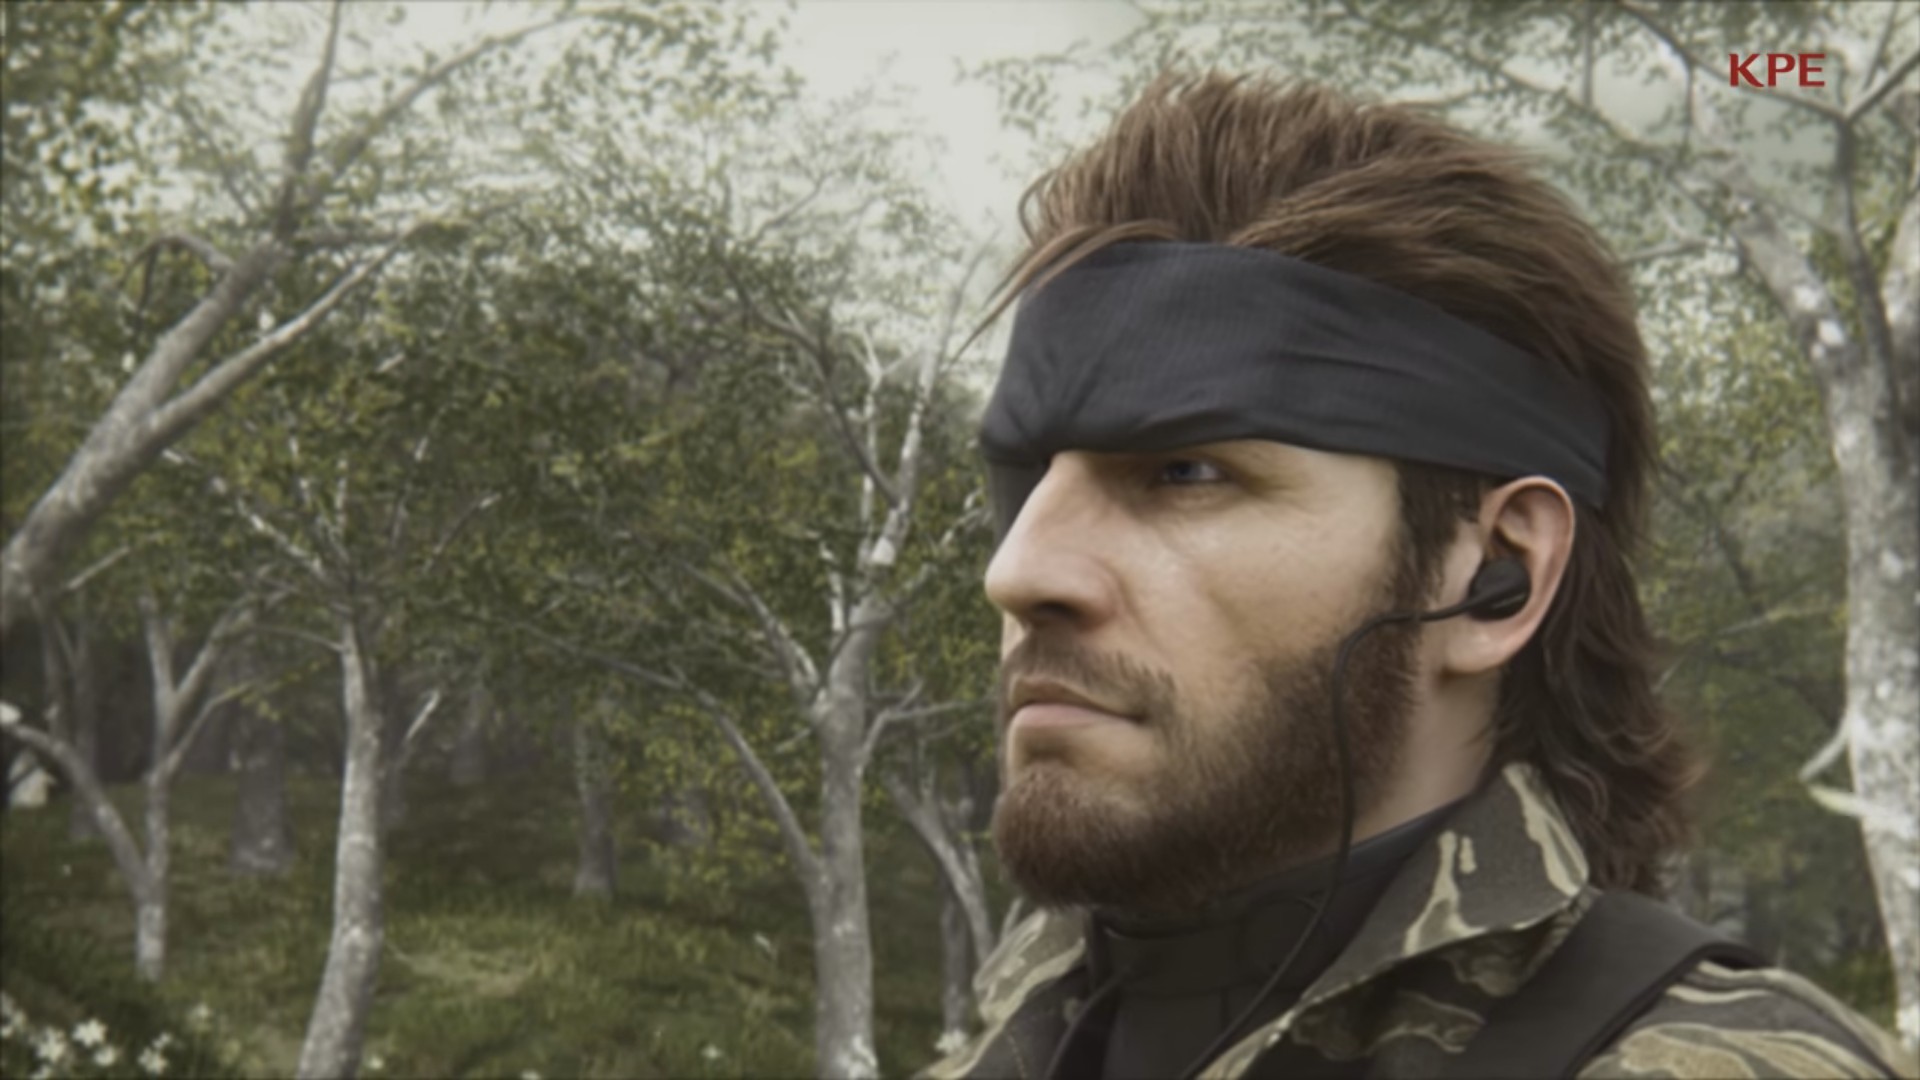 pachislot Metal Gear Solid